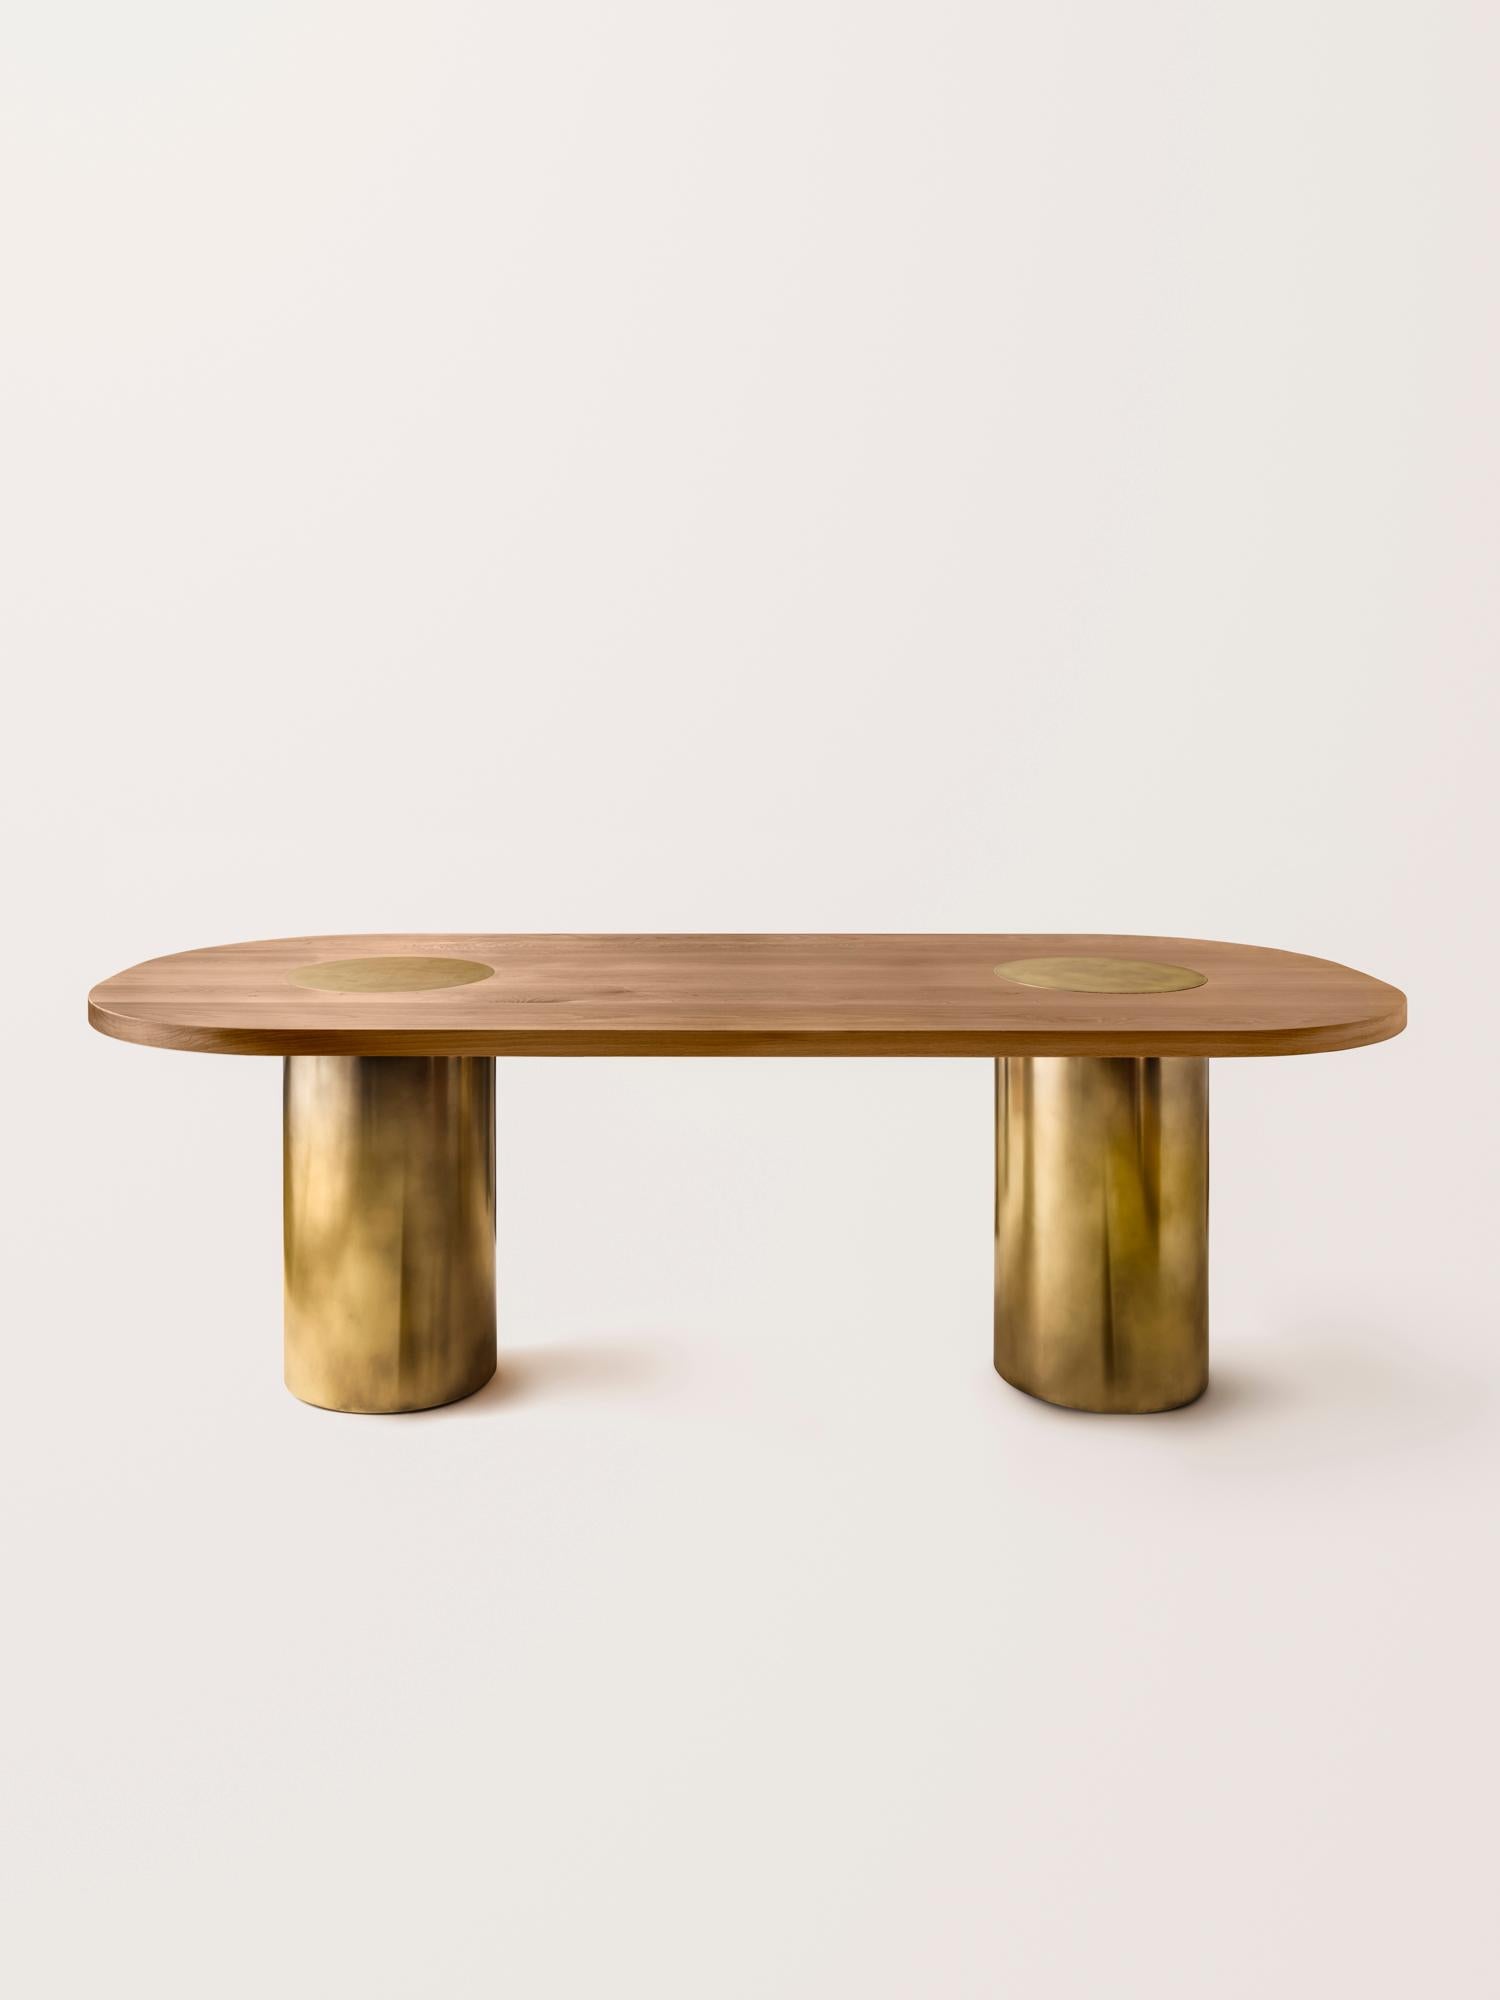 Contemporary Silo Dining Table - Ebonized Walnut and Burnished Brass For Sale